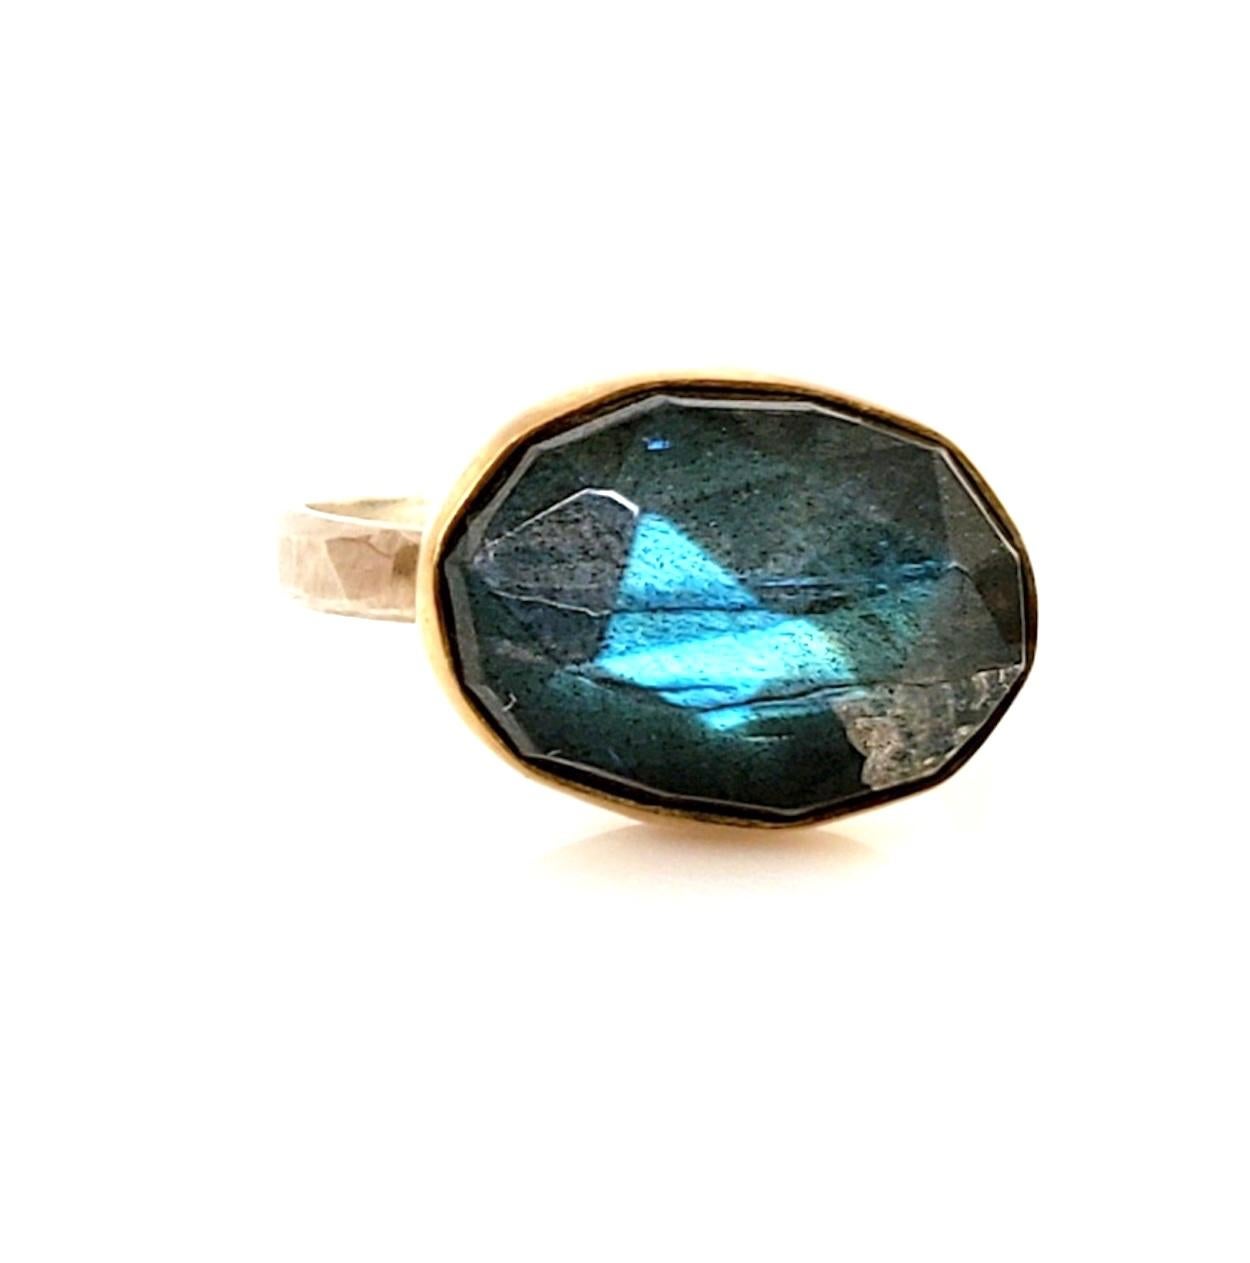 Rose cut labradorite stone, just over 7.75 carats, about 10 x 14 mm, hand set in a 22K gold bezel, sterling silver back and band. Hammered band with a brush finish. Size 7. This stone has been cut with a nice high dome (about 6.5 mm high) and